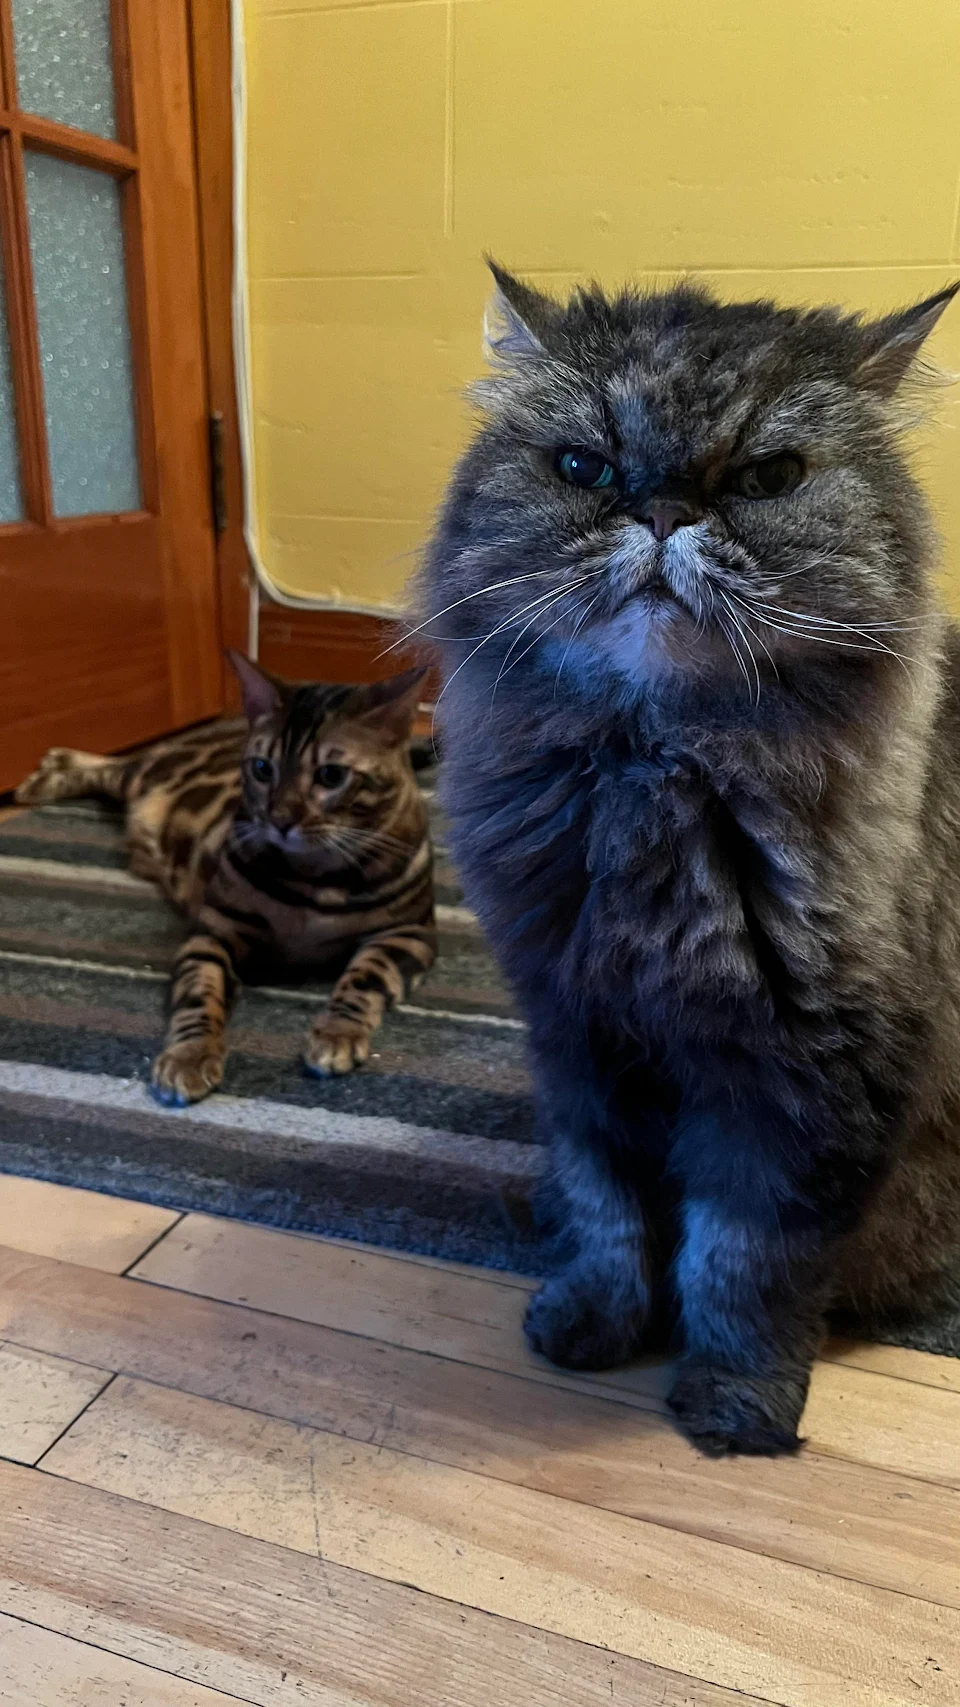 One is 17 years old, the other 8 months old